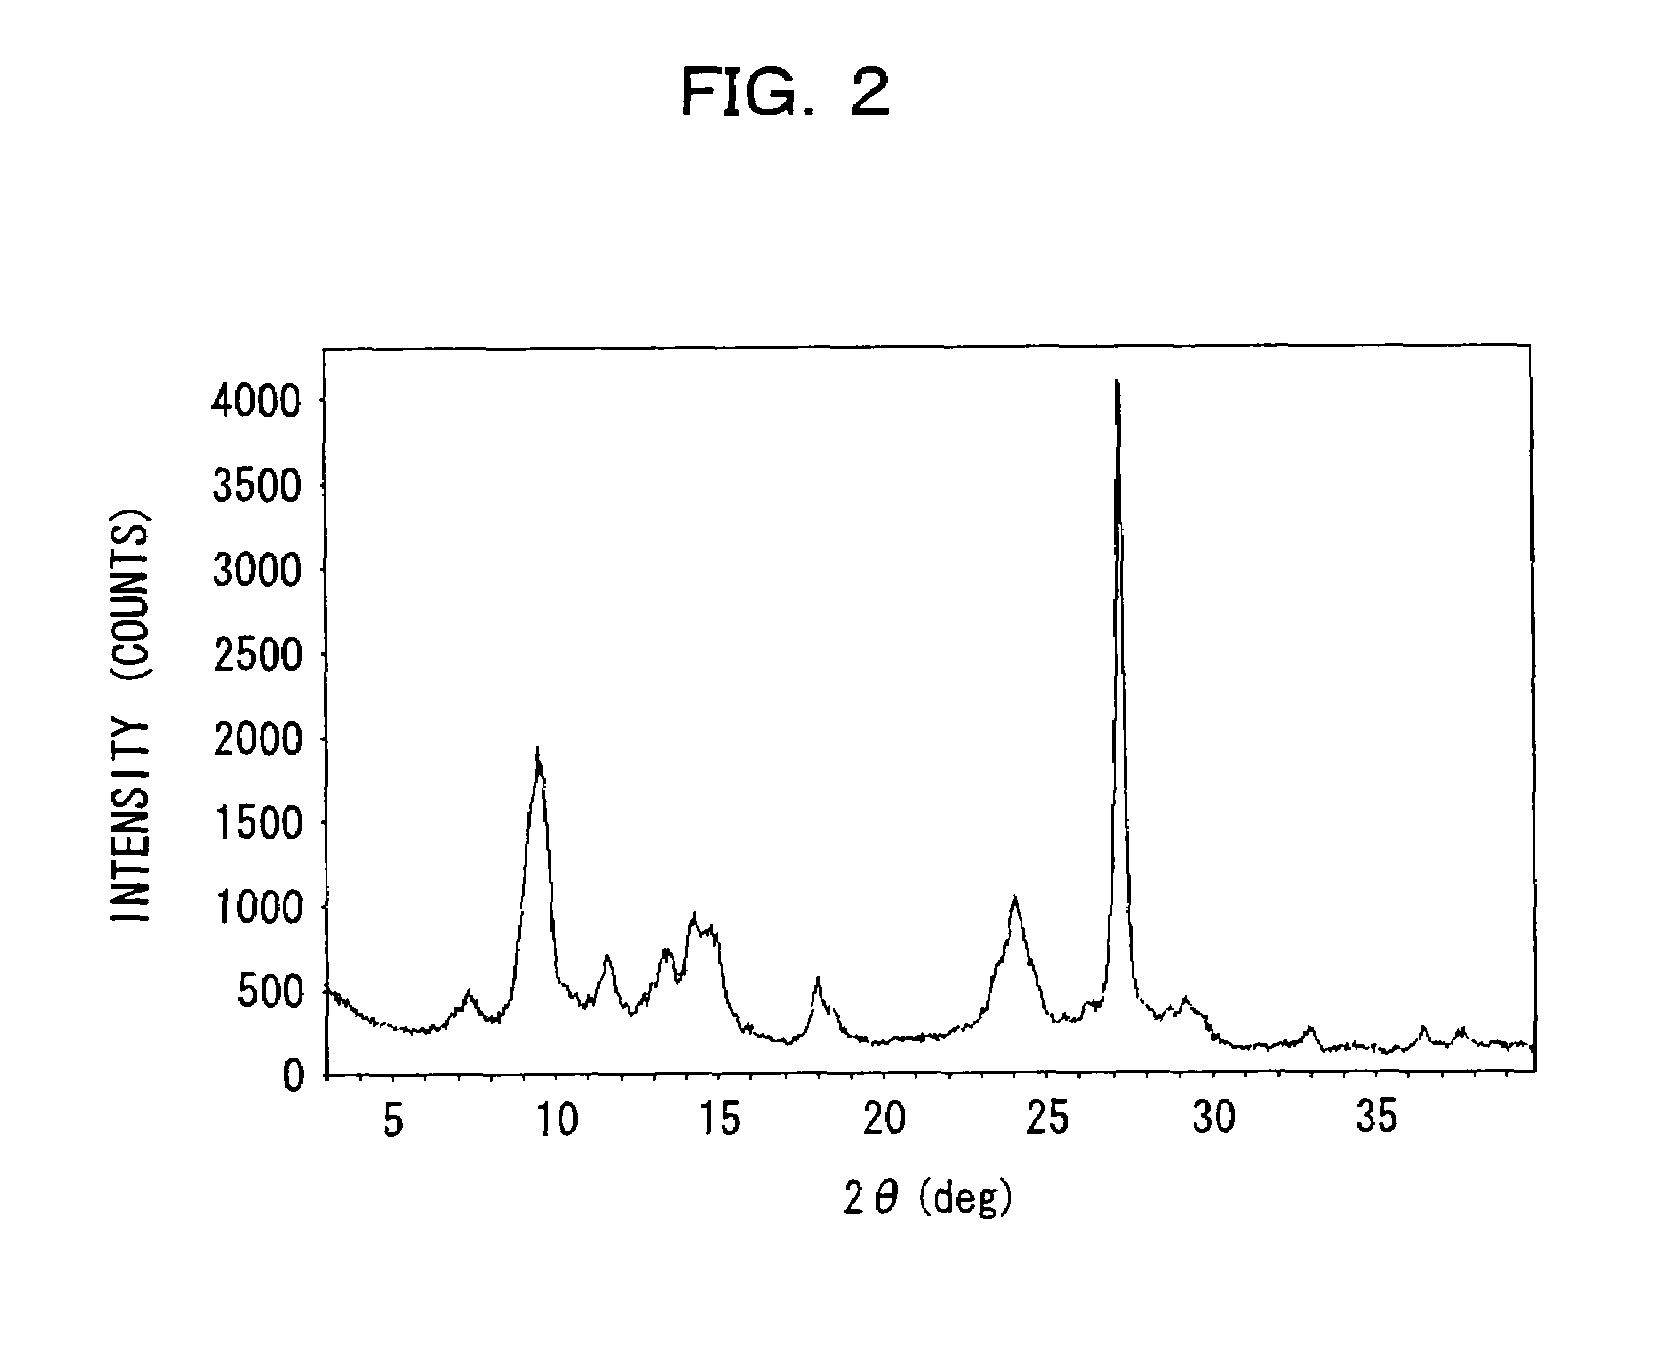 Electrophotographic photosensitive member, image forming device using same, and electrophotographic photosensitive member cartridge